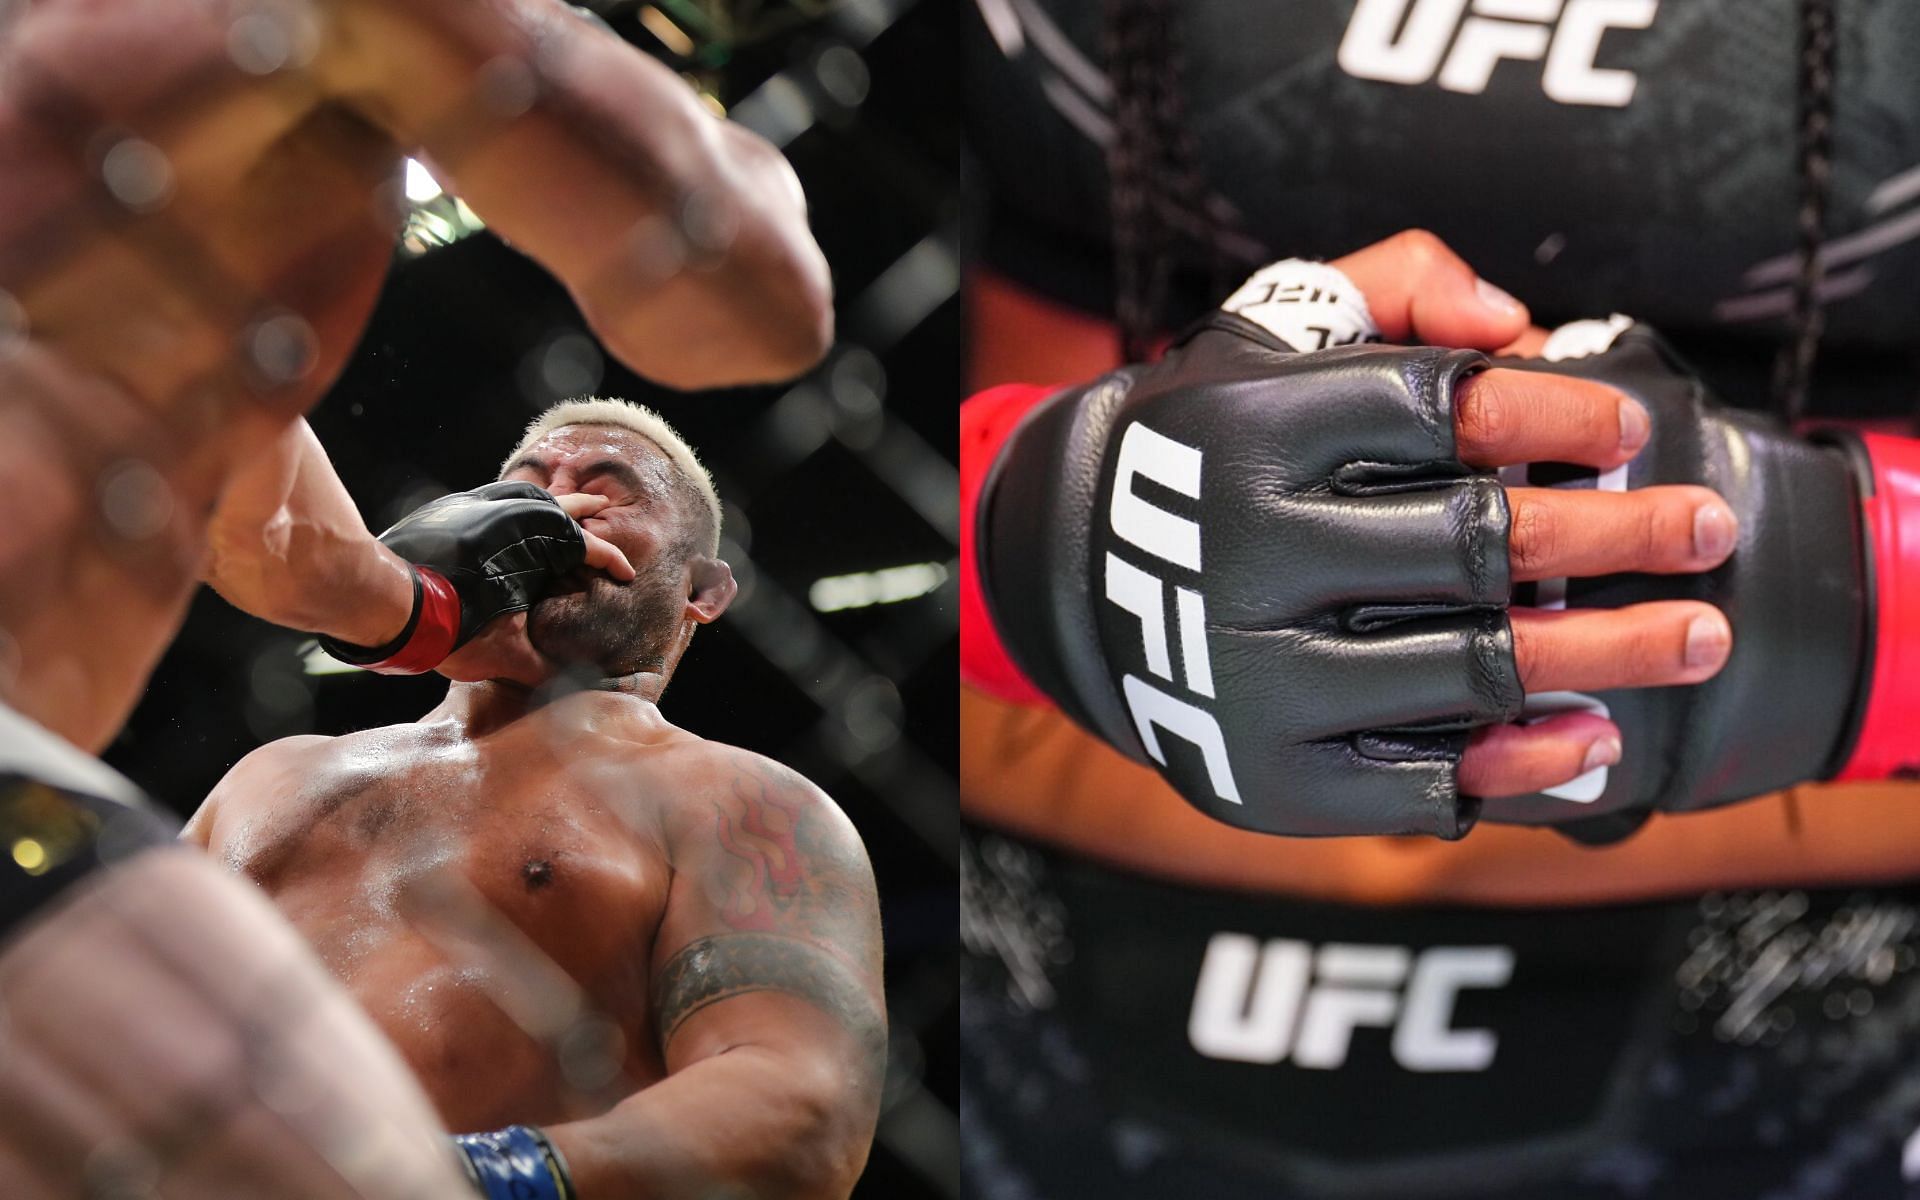 Combat sports megastar Brock Lesnar notably landed an eye poke on Mark Hunt with the old UFC gloves at UFC 200 in July 2016 (left); the new UFC gloves (right) were officially introduced in June 2024 [Images courtesy: Getty Images and UFC]